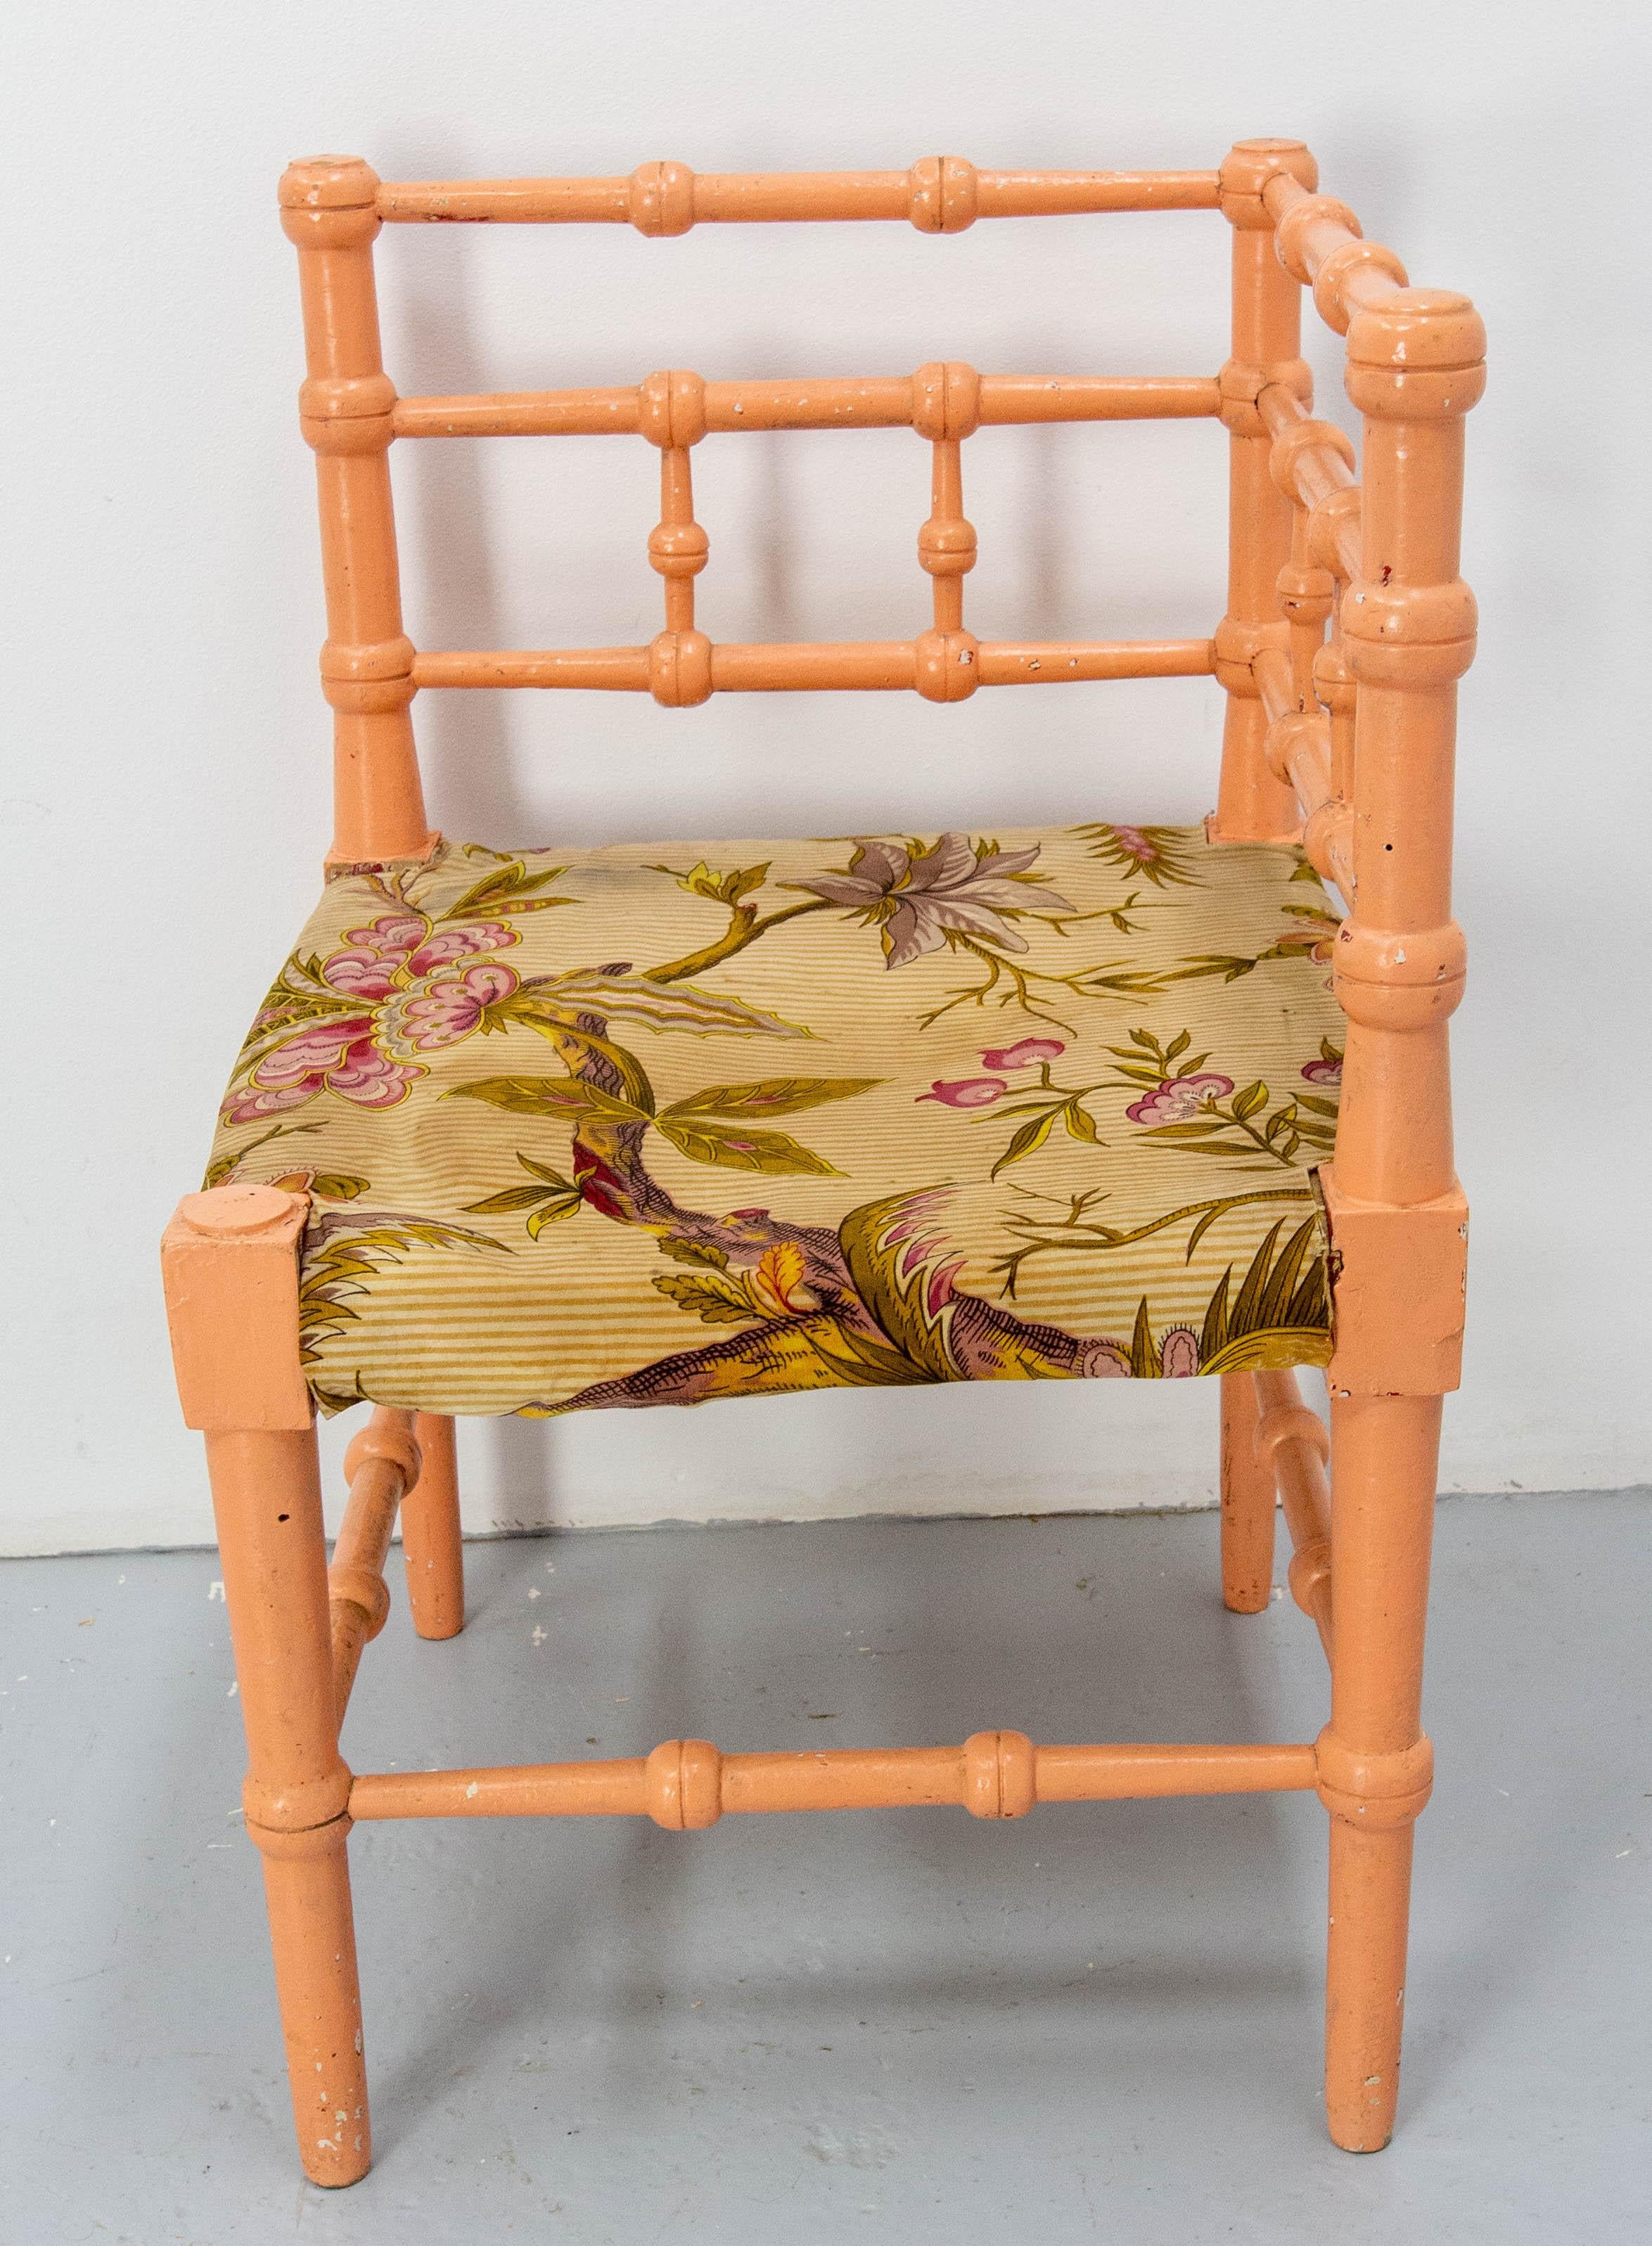 Wicker Turned Corner Chair for Child Painted Wood & Fabric French, 19th Century For Sale